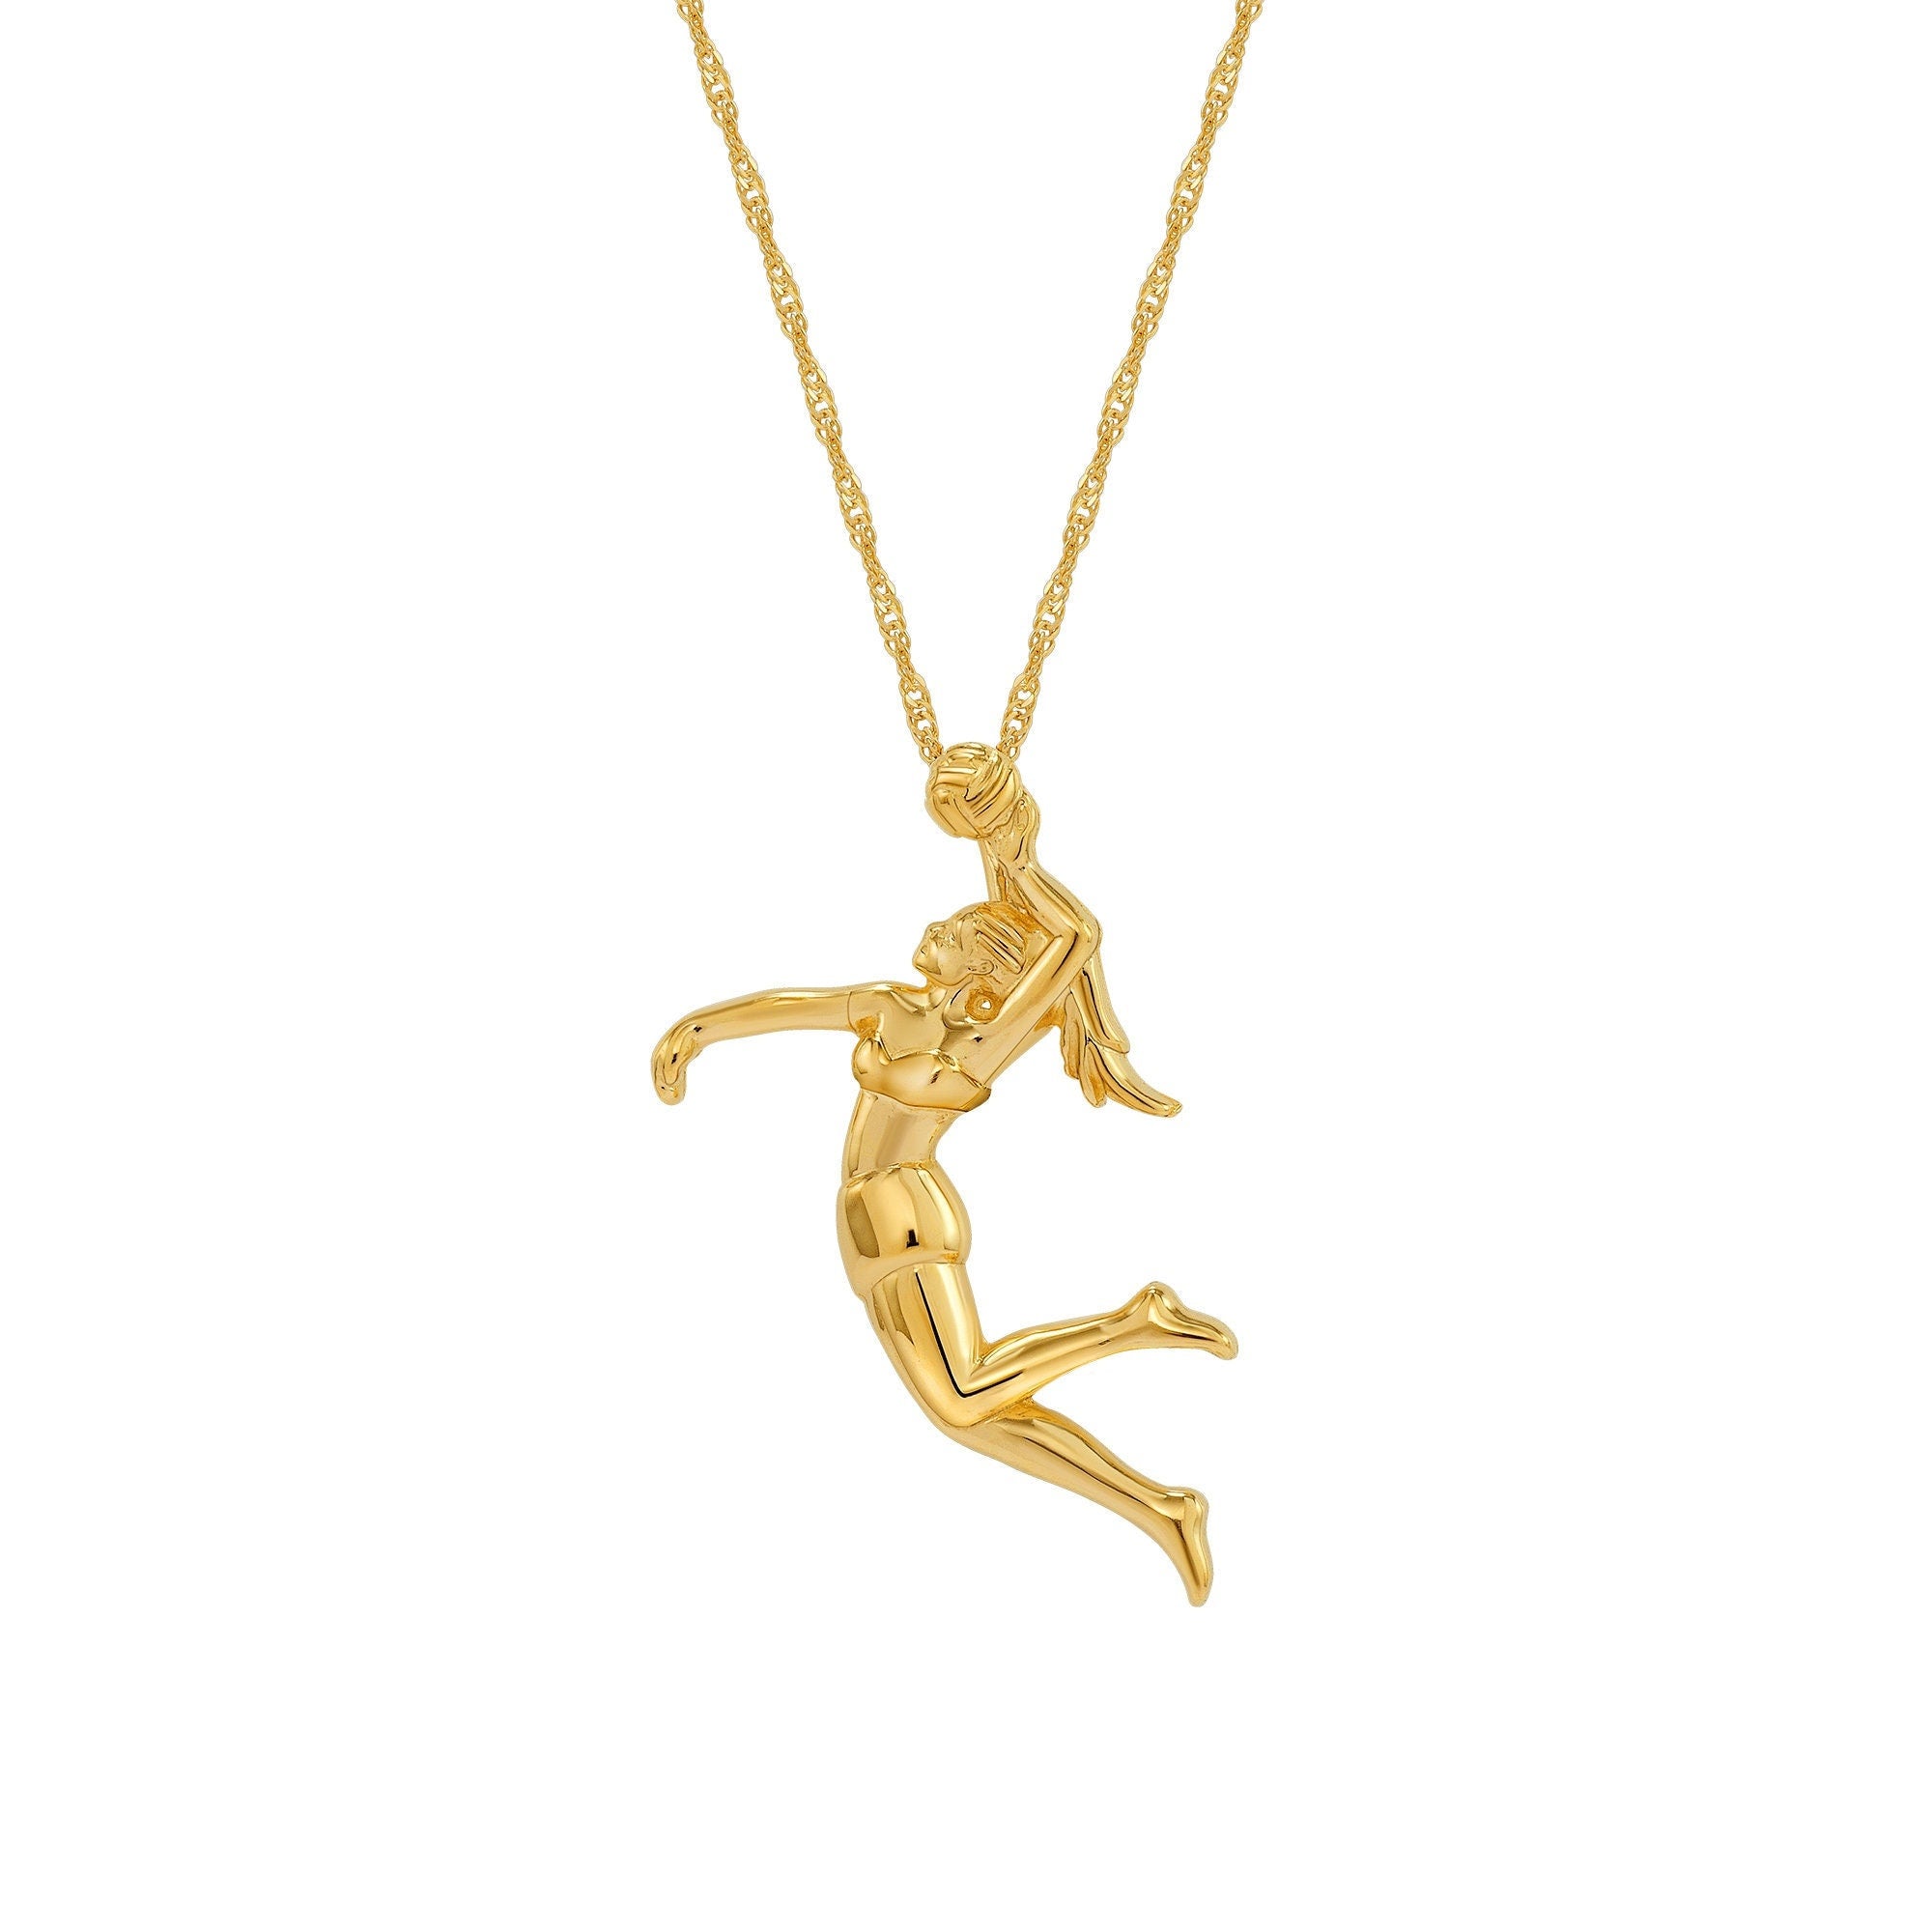 14k solid yellow gold female volleyball player pendant on 18" solid gold chain